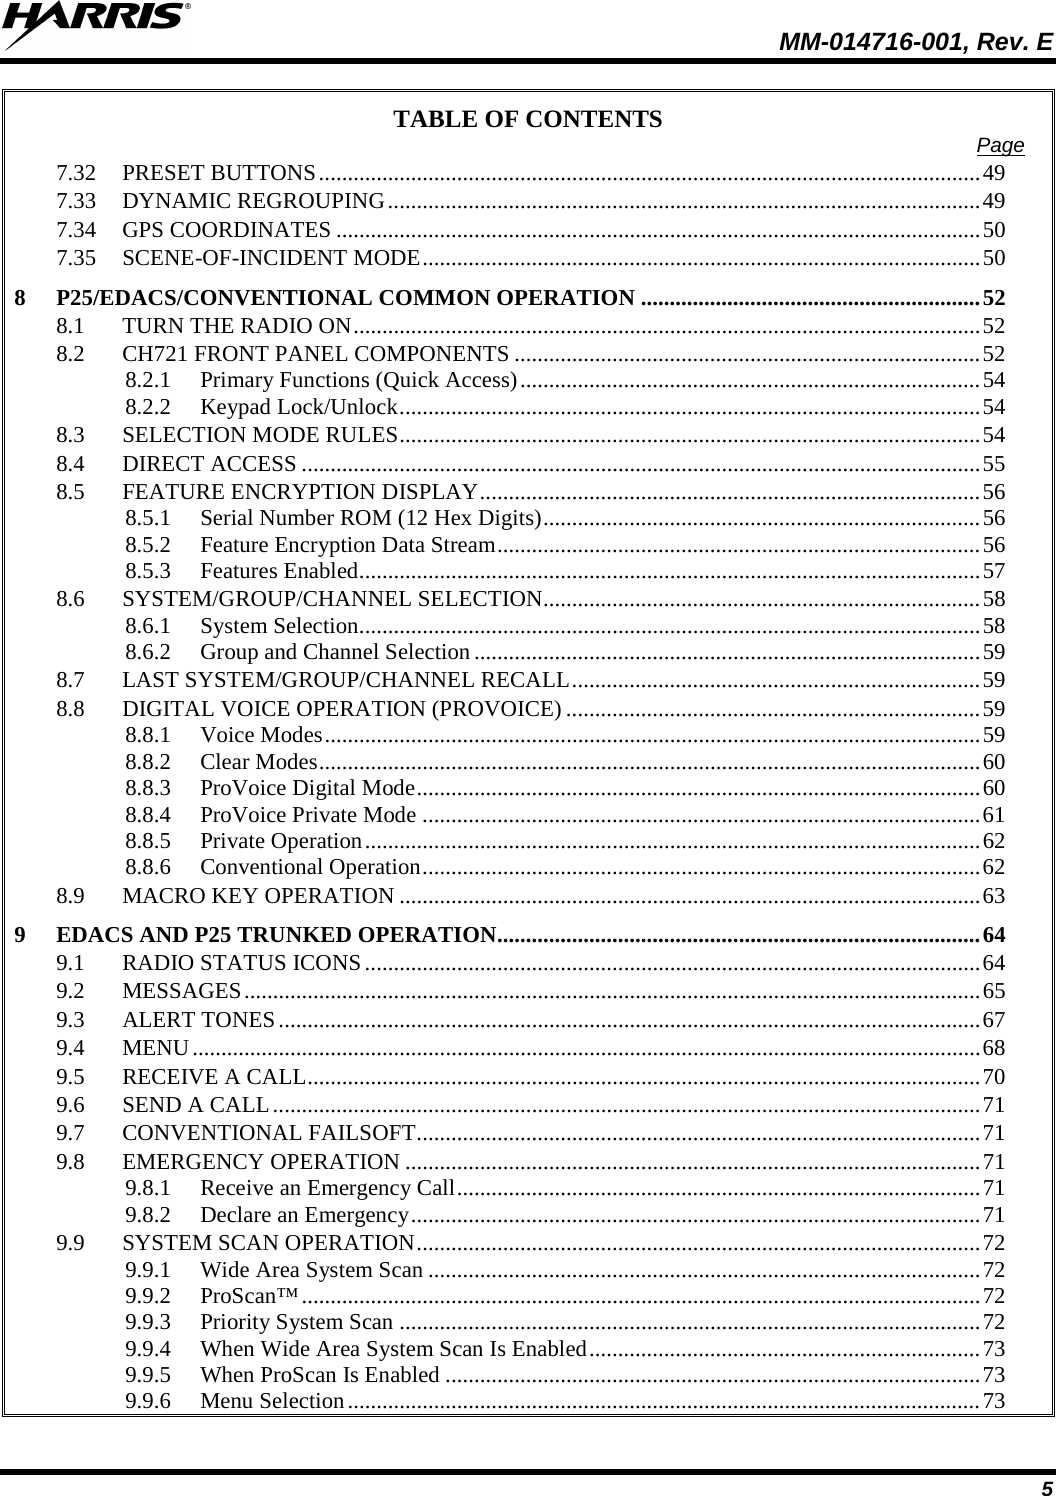  MM-014716-001, Rev. E 5 TABLE OF CONTENTS Page 7.32 PRESET BUTTONS ................................................................................................................... 49 7.33 DYNAMIC REGROUPING ....................................................................................................... 49 7.34 GPS COORDINATES ................................................................................................................ 50 7.35 SCENE-OF-INCIDENT MODE ................................................................................................. 50 8 P25/EDACS/CONVENTIONAL COMMON OPERATION ........................................................... 52 8.1 TURN THE RADIO ON ............................................................................................................. 52 8.2 CH721 FRONT PANEL COMPONENTS ................................................................................. 52 8.2.1 Primary Functions (Quick Access) ................................................................................ 54 8.2.2 Keypad Lock/Unlock ..................................................................................................... 54 8.3 SELECTION MODE RULES ..................................................................................................... 54 8.4 DIRECT ACCESS ...................................................................................................................... 55 8.5 FEATURE ENCRYPTION DISPLAY ....................................................................................... 56 8.5.1 Serial Number ROM (12 Hex Digits) ............................................................................ 56 8.5.2 Feature Encryption Data Stream .................................................................................... 56 8.5.3 Features Enabled ............................................................................................................ 57 8.6 SYSTEM/GROUP/CHANNEL SELECTION............................................................................ 58 8.6.1 System Selection ............................................................................................................ 58 8.6.2 Group and Channel Selection ........................................................................................ 59 8.7 LAST SYSTEM/GROUP/CHANNEL RECALL ....................................................................... 59 8.8 DIGITAL VOICE OPERATION (PROVOICE) ........................................................................ 59 8.8.1 Voice Modes .................................................................................................................. 59 8.8.2 Clear Modes ................................................................................................................... 60 8.8.3 ProVoice Digital Mode .................................................................................................. 60 8.8.4 ProVoice Private Mode ................................................................................................. 61 8.8.5 Private Operation ........................................................................................................... 62 8.8.6 Conventional Operation ................................................................................................. 62 8.9 MACRO KEY OPERATION ..................................................................................................... 63 9 EDACS AND P25 TRUNKED OPERATION.................................................................................... 64 9.1 RADIO STATUS ICONS ........................................................................................................... 64 9.2 MESSAGES ................................................................................................................................ 65 9.3 ALERT TONES .......................................................................................................................... 67 9.4 MENU ......................................................................................................................................... 68 9.5 RECEIVE A CALL ..................................................................................................................... 70 9.6 SEND A CALL ........................................................................................................................... 71 9.7 CONVENTIONAL FAILSOFT .................................................................................................. 71 9.8 EMERGENCY OPERATION .................................................................................................... 71 9.8.1 Receive an Emergency Call ........................................................................................... 71 9.8.2 Declare an Emergency ................................................................................................... 71 9.9 SYSTEM SCAN OPERATION .................................................................................................. 72 9.9.1 Wide Area System Scan ................................................................................................ 72 9.9.2 ProScan™ ...................................................................................................................... 72 9.9.3 Priority System Scan ..................................................................................................... 72 9.9.4 When Wide Area System Scan Is Enabled .................................................................... 73 9.9.5 When ProScan Is Enabled ............................................................................................. 73 9.9.6 Menu Selection .............................................................................................................. 73 